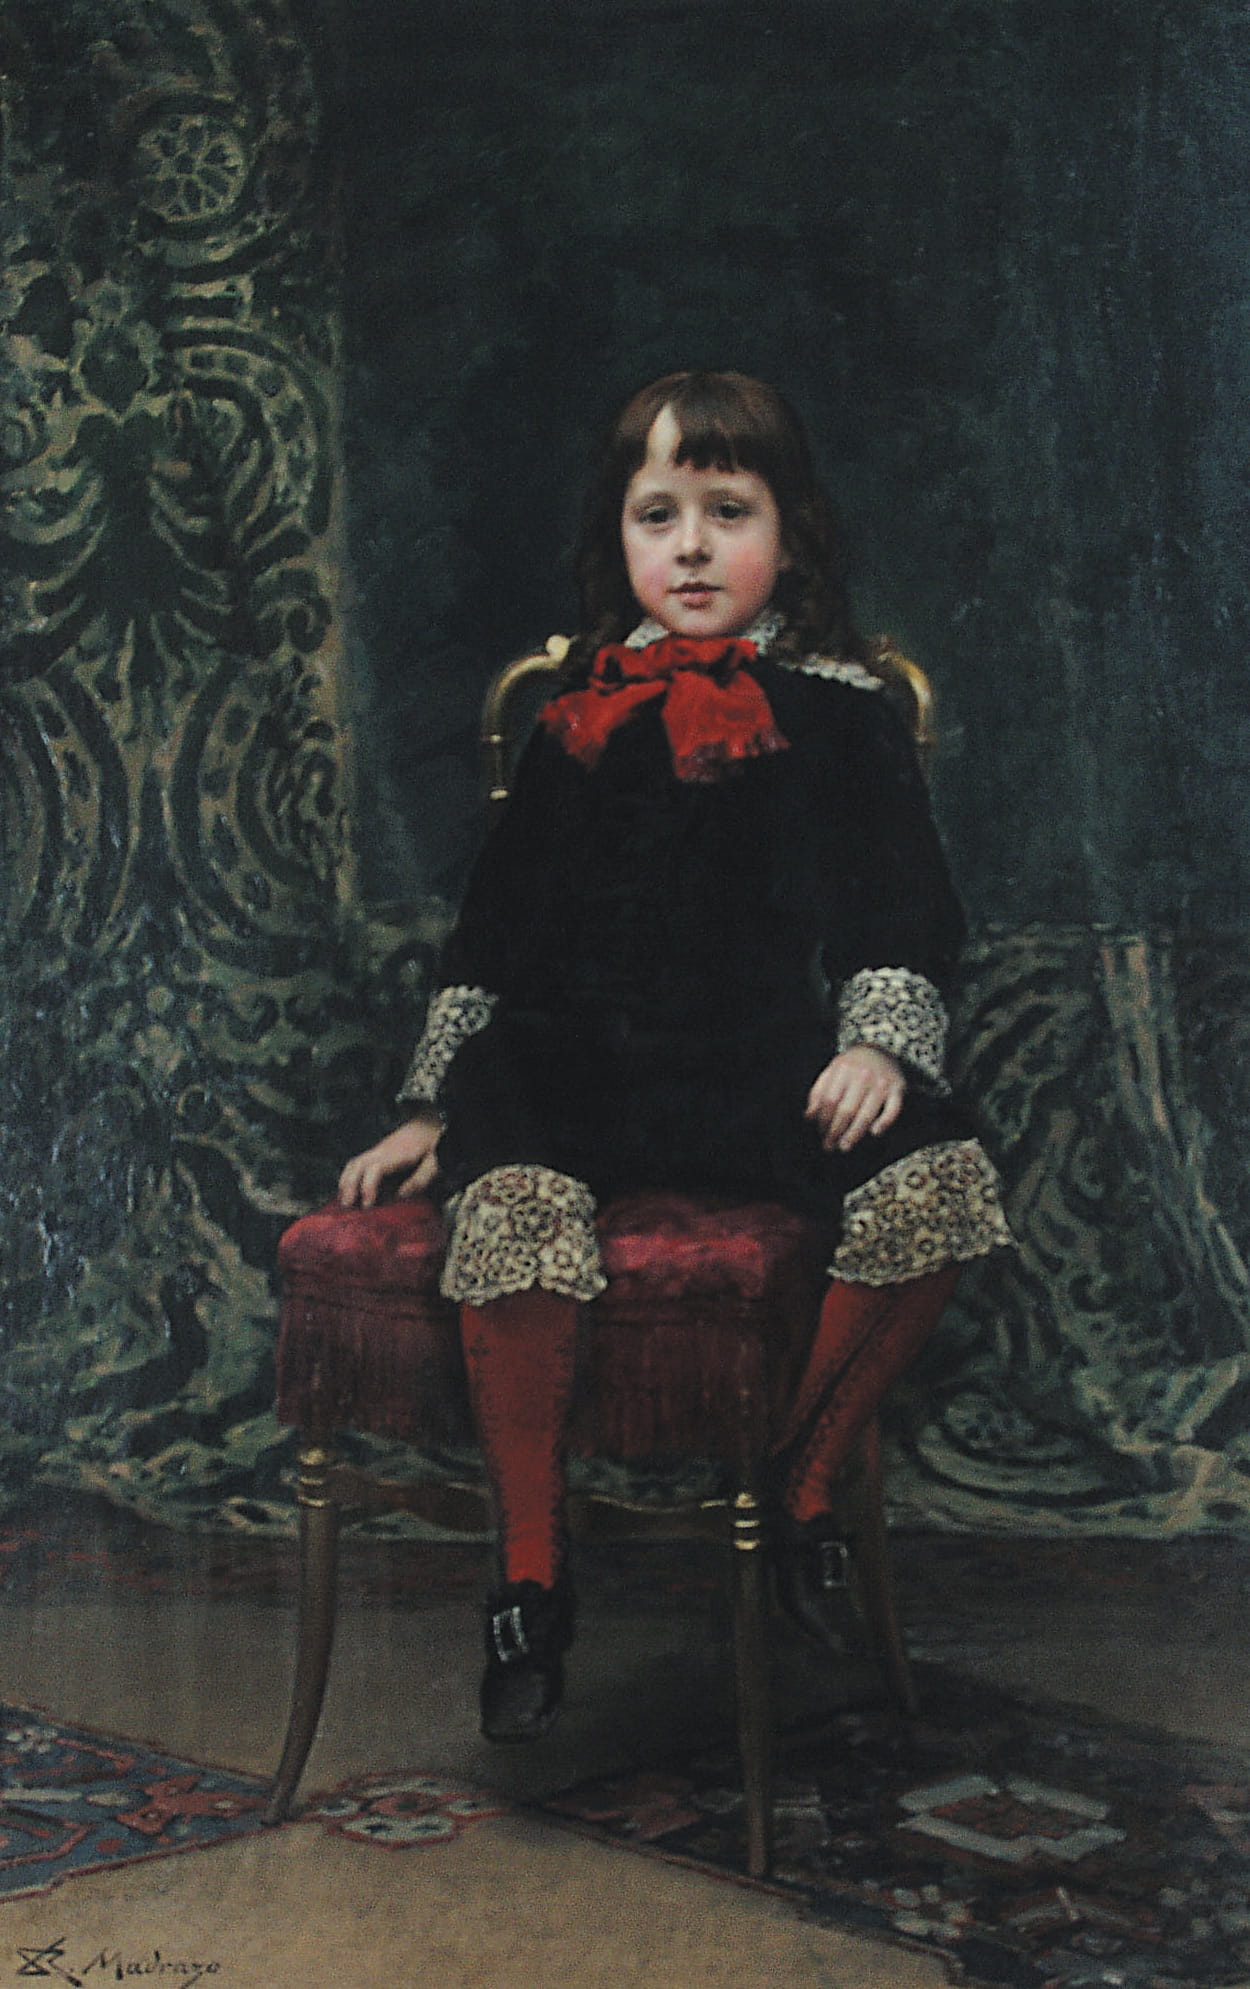 This portrait of the founder's youngest son George W. Childs Drexel was completed by Spanish painter Raimundo de Madrazo y Garreta in 1874 and was part of the founder's personal art collection displayed in his home. Photo courtesy The Drexel Collection.